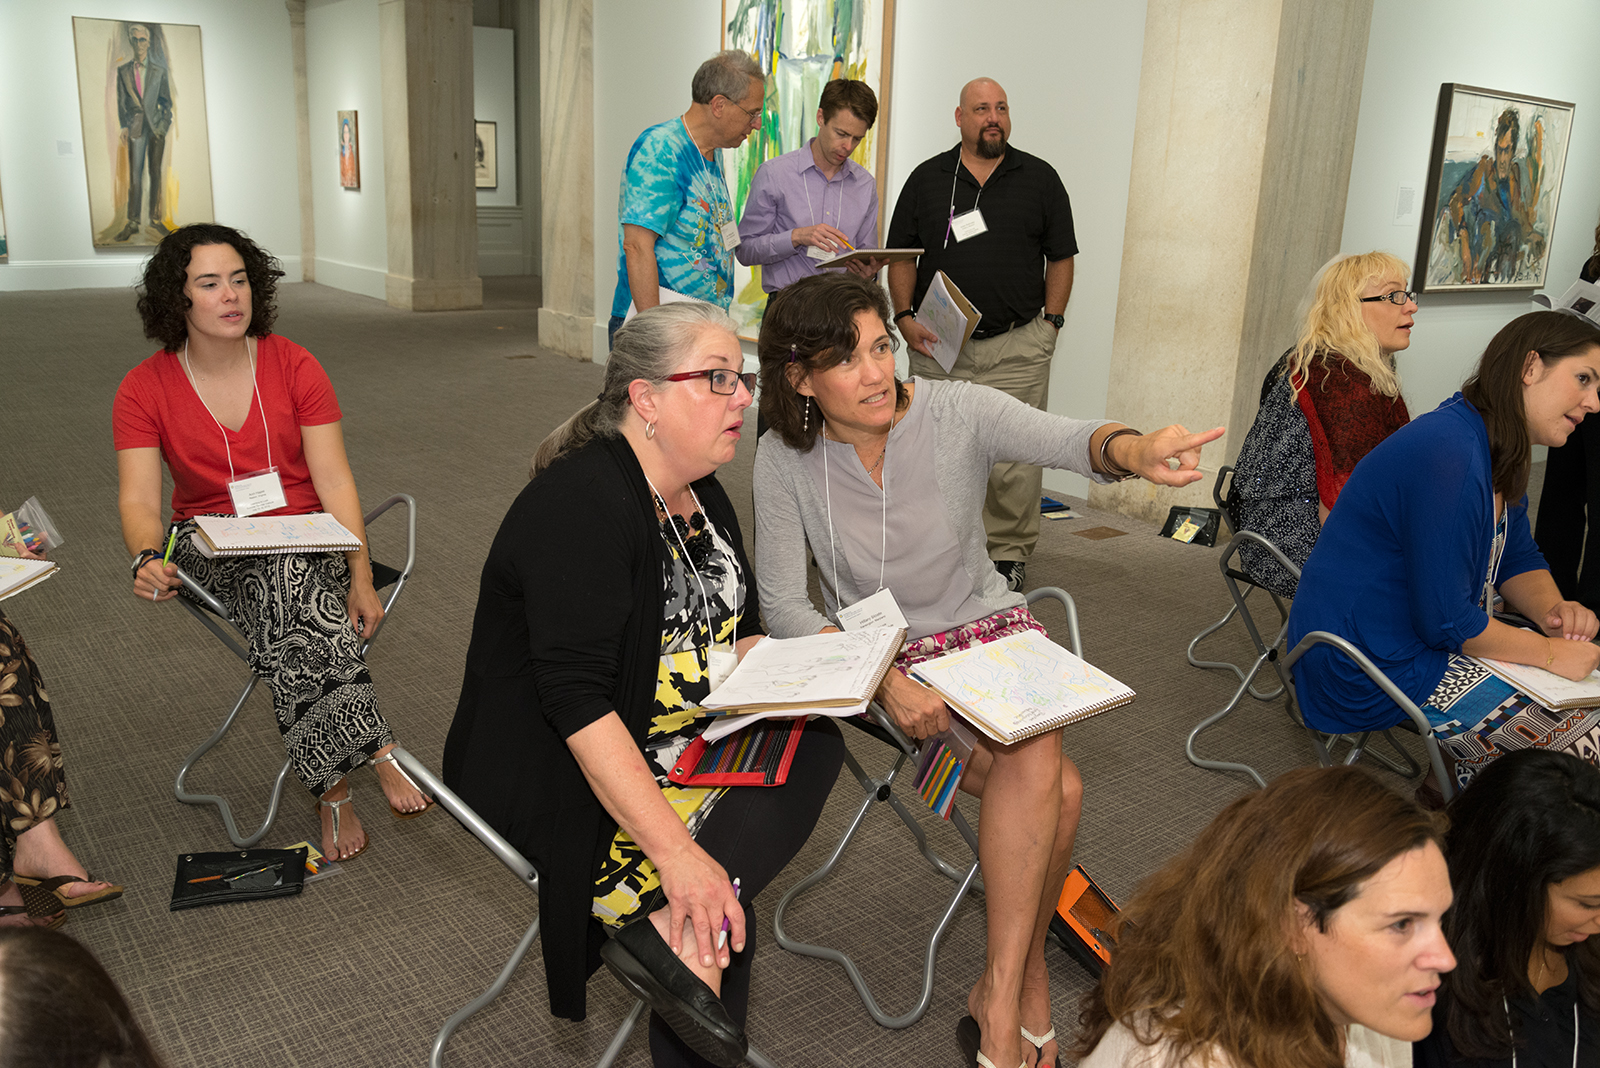 Smithsonian Summer Sessions: Inspiring Civic Engagement